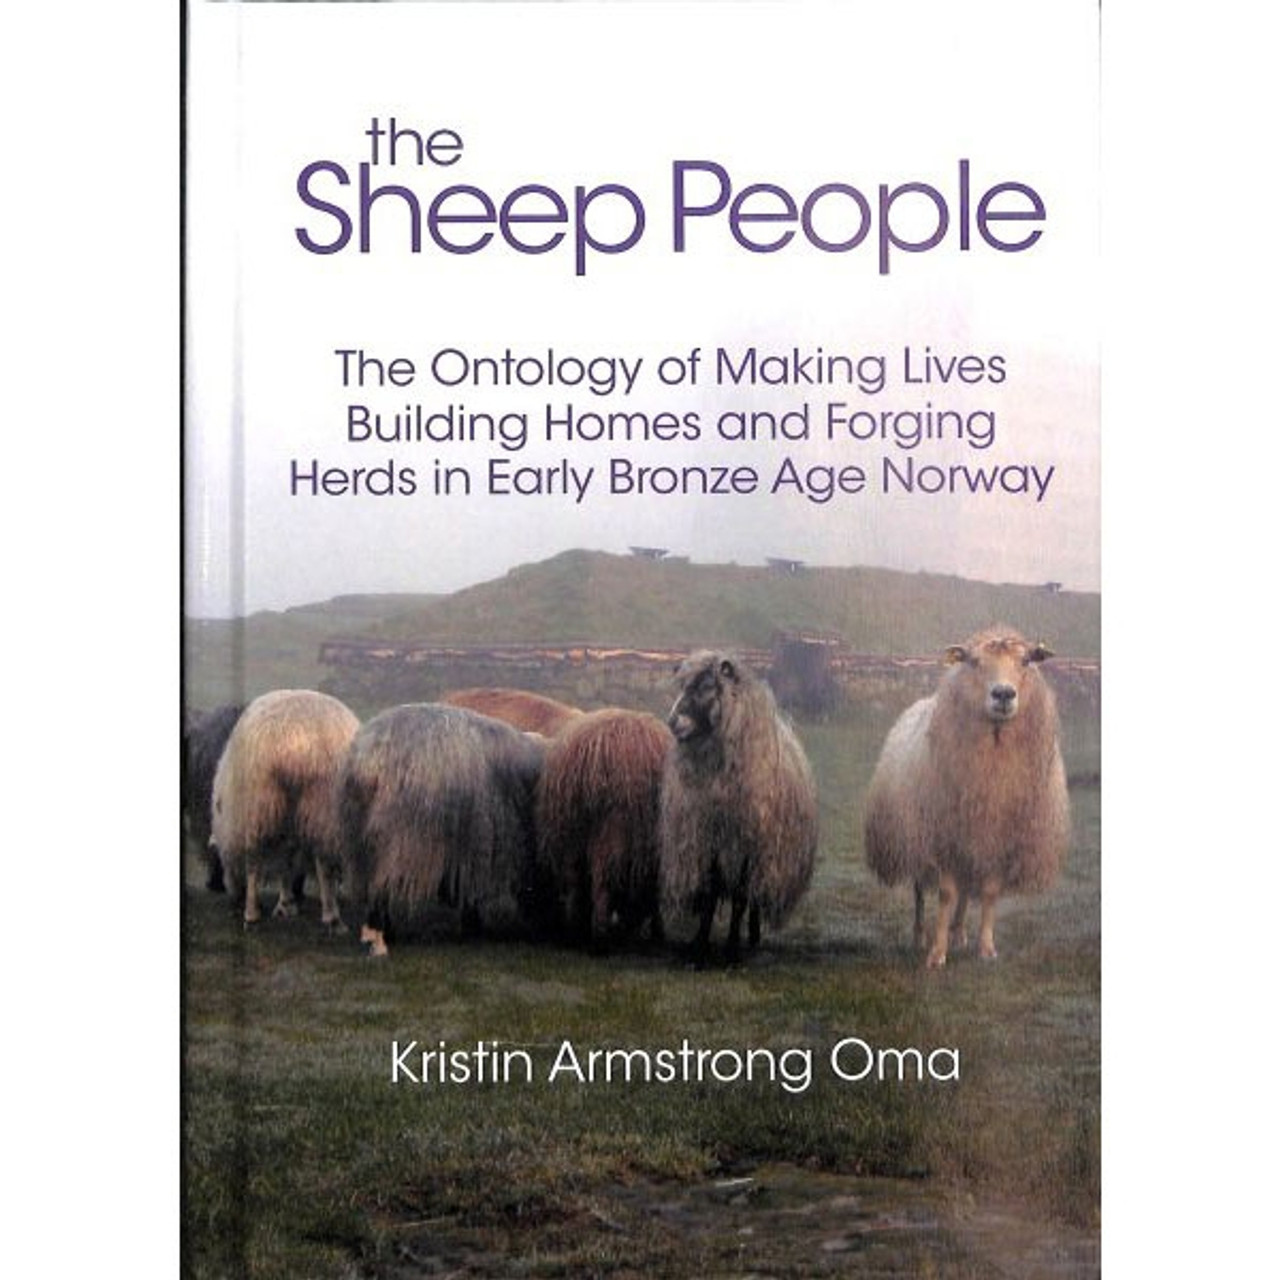 The Sheep People | The Woolery